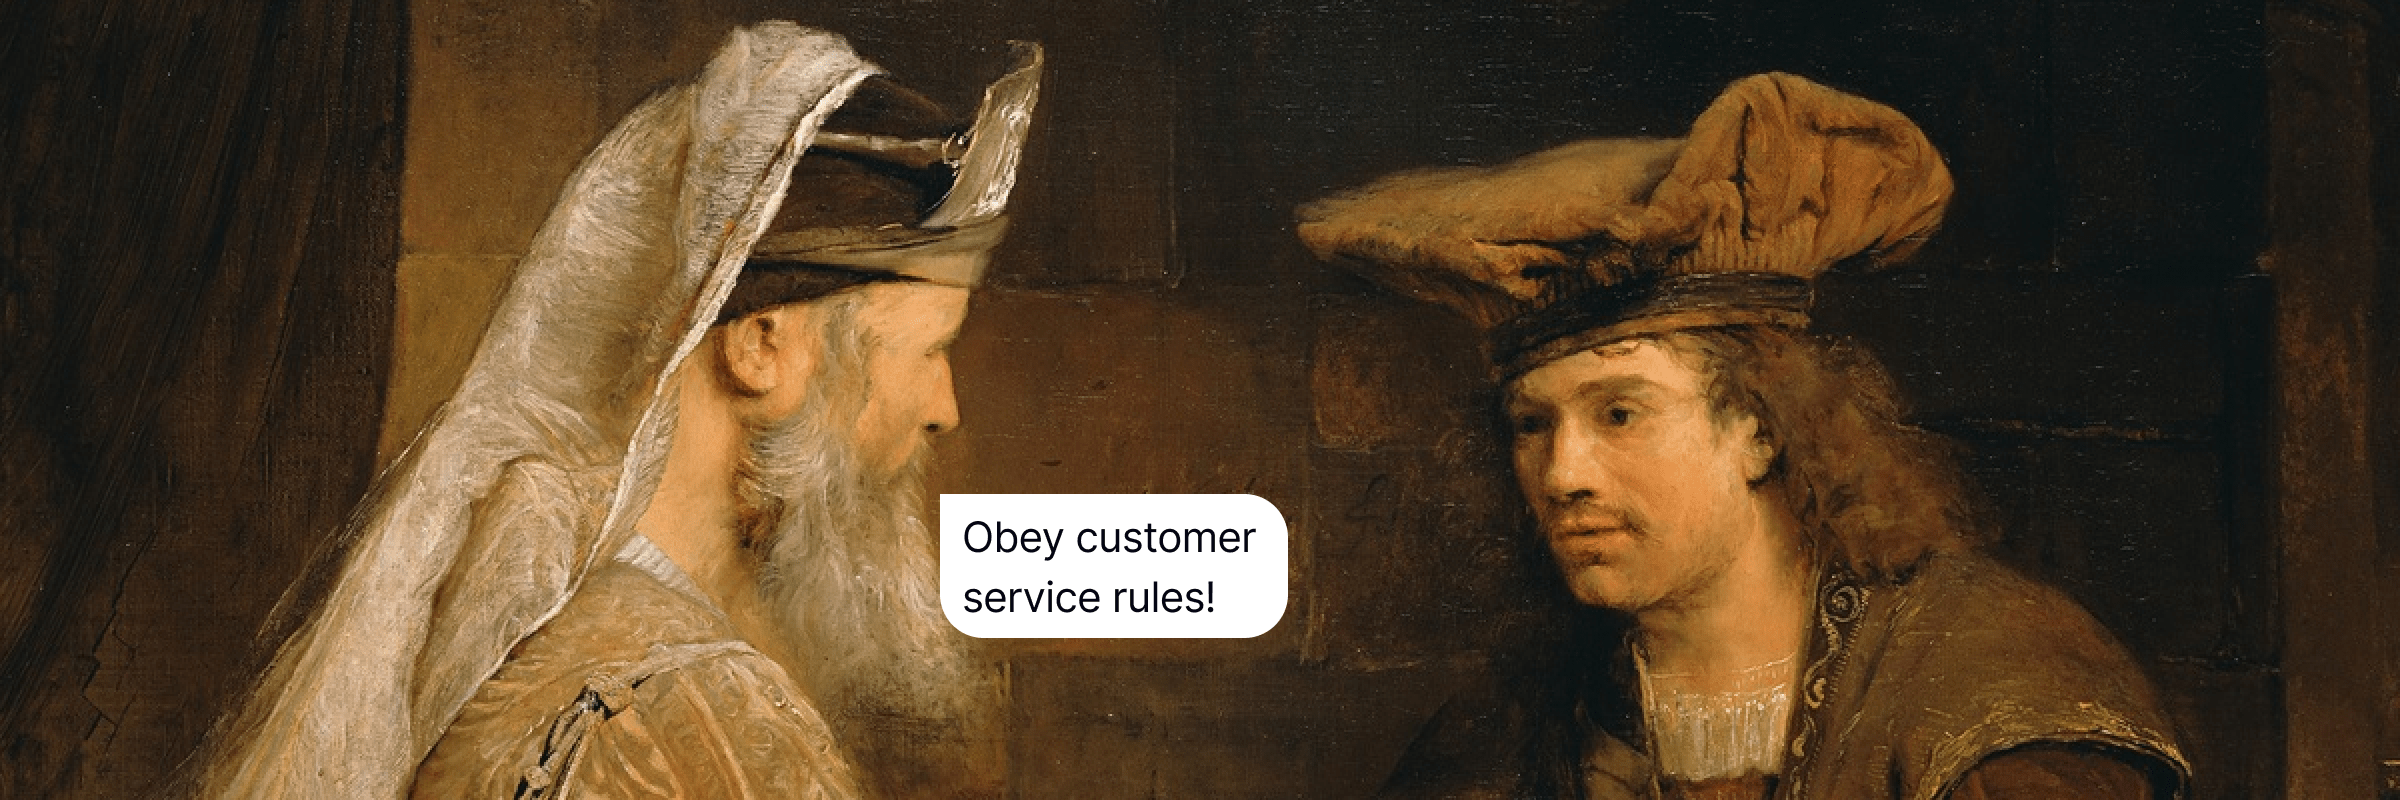 15 Tried and Tested Customer Service Rules to Boost Satisfaction